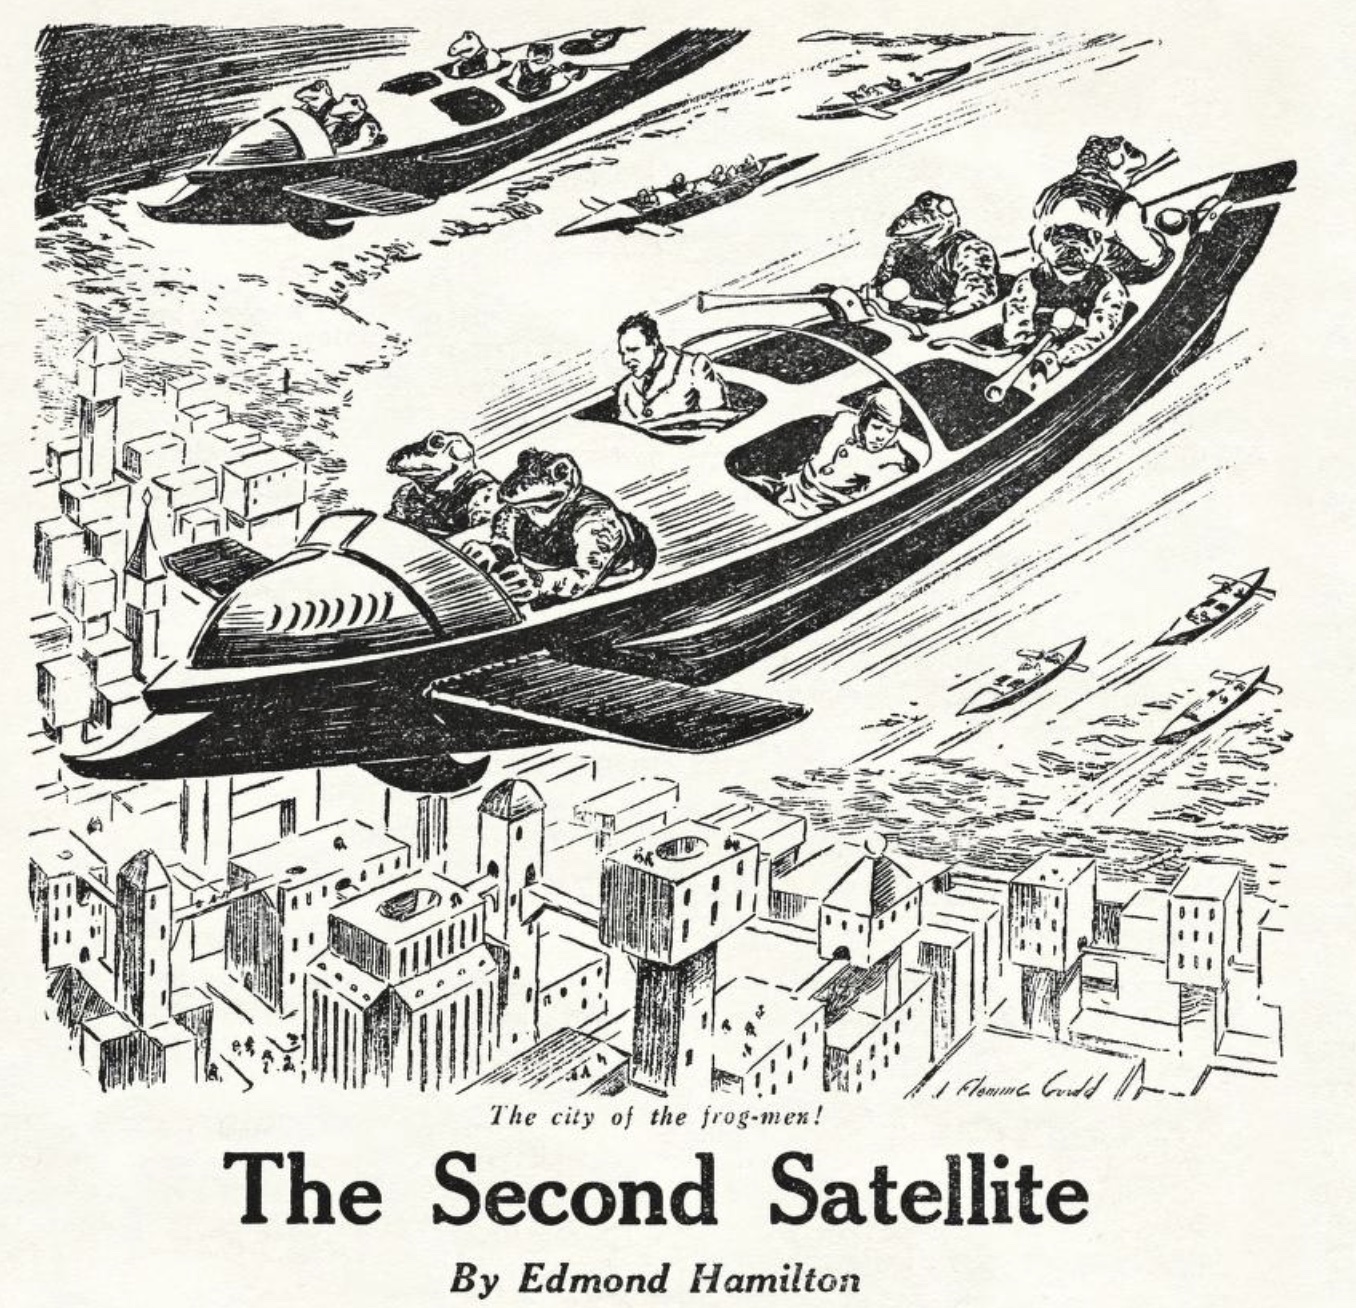 Introductory image for The Second Satellite by Edmund Hamilton